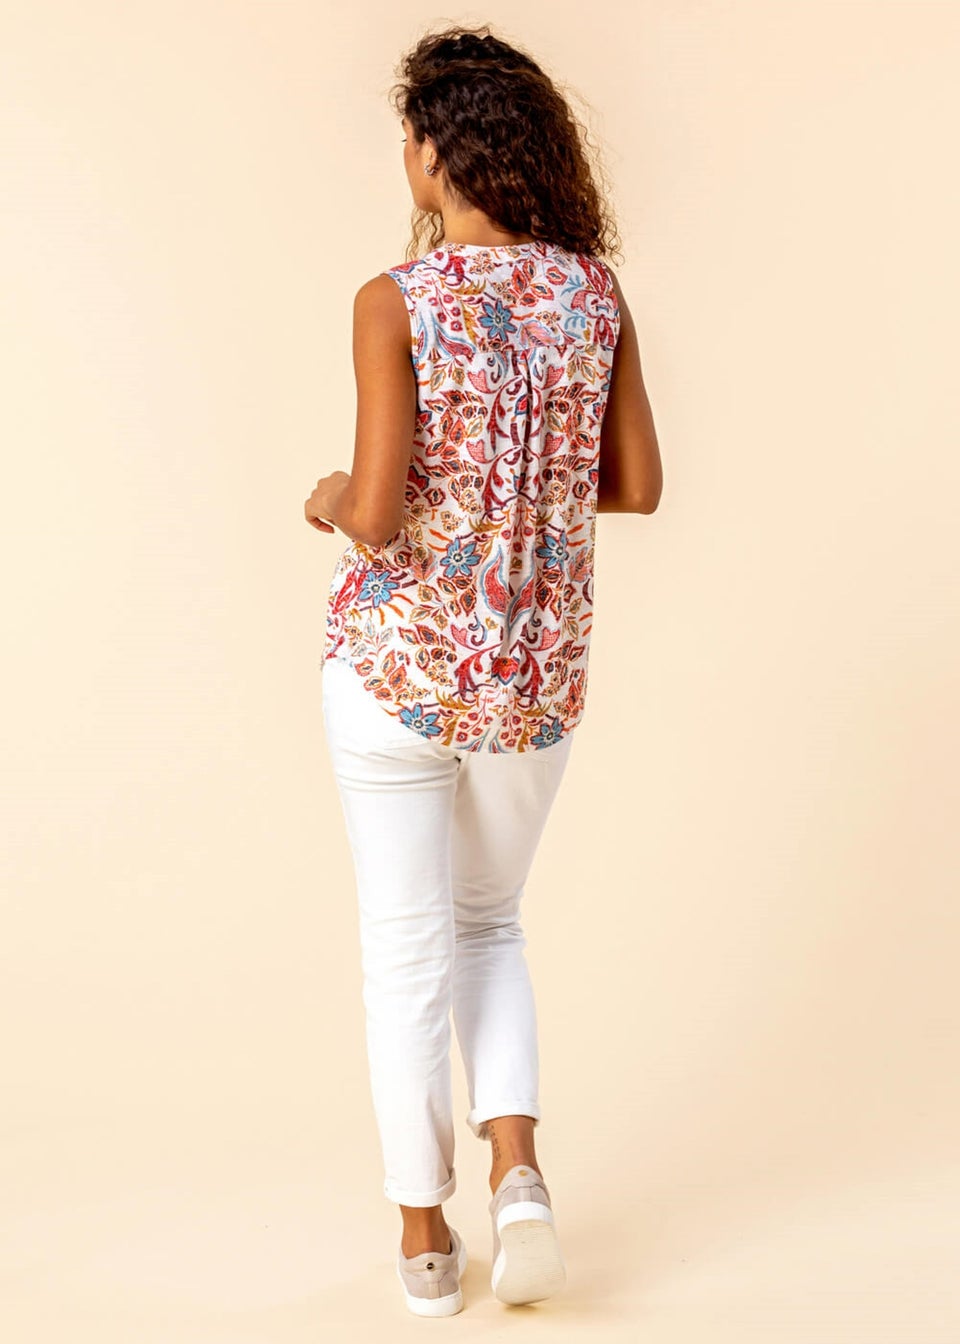 Roman Red Paisley Floral Print Sleeveless Top